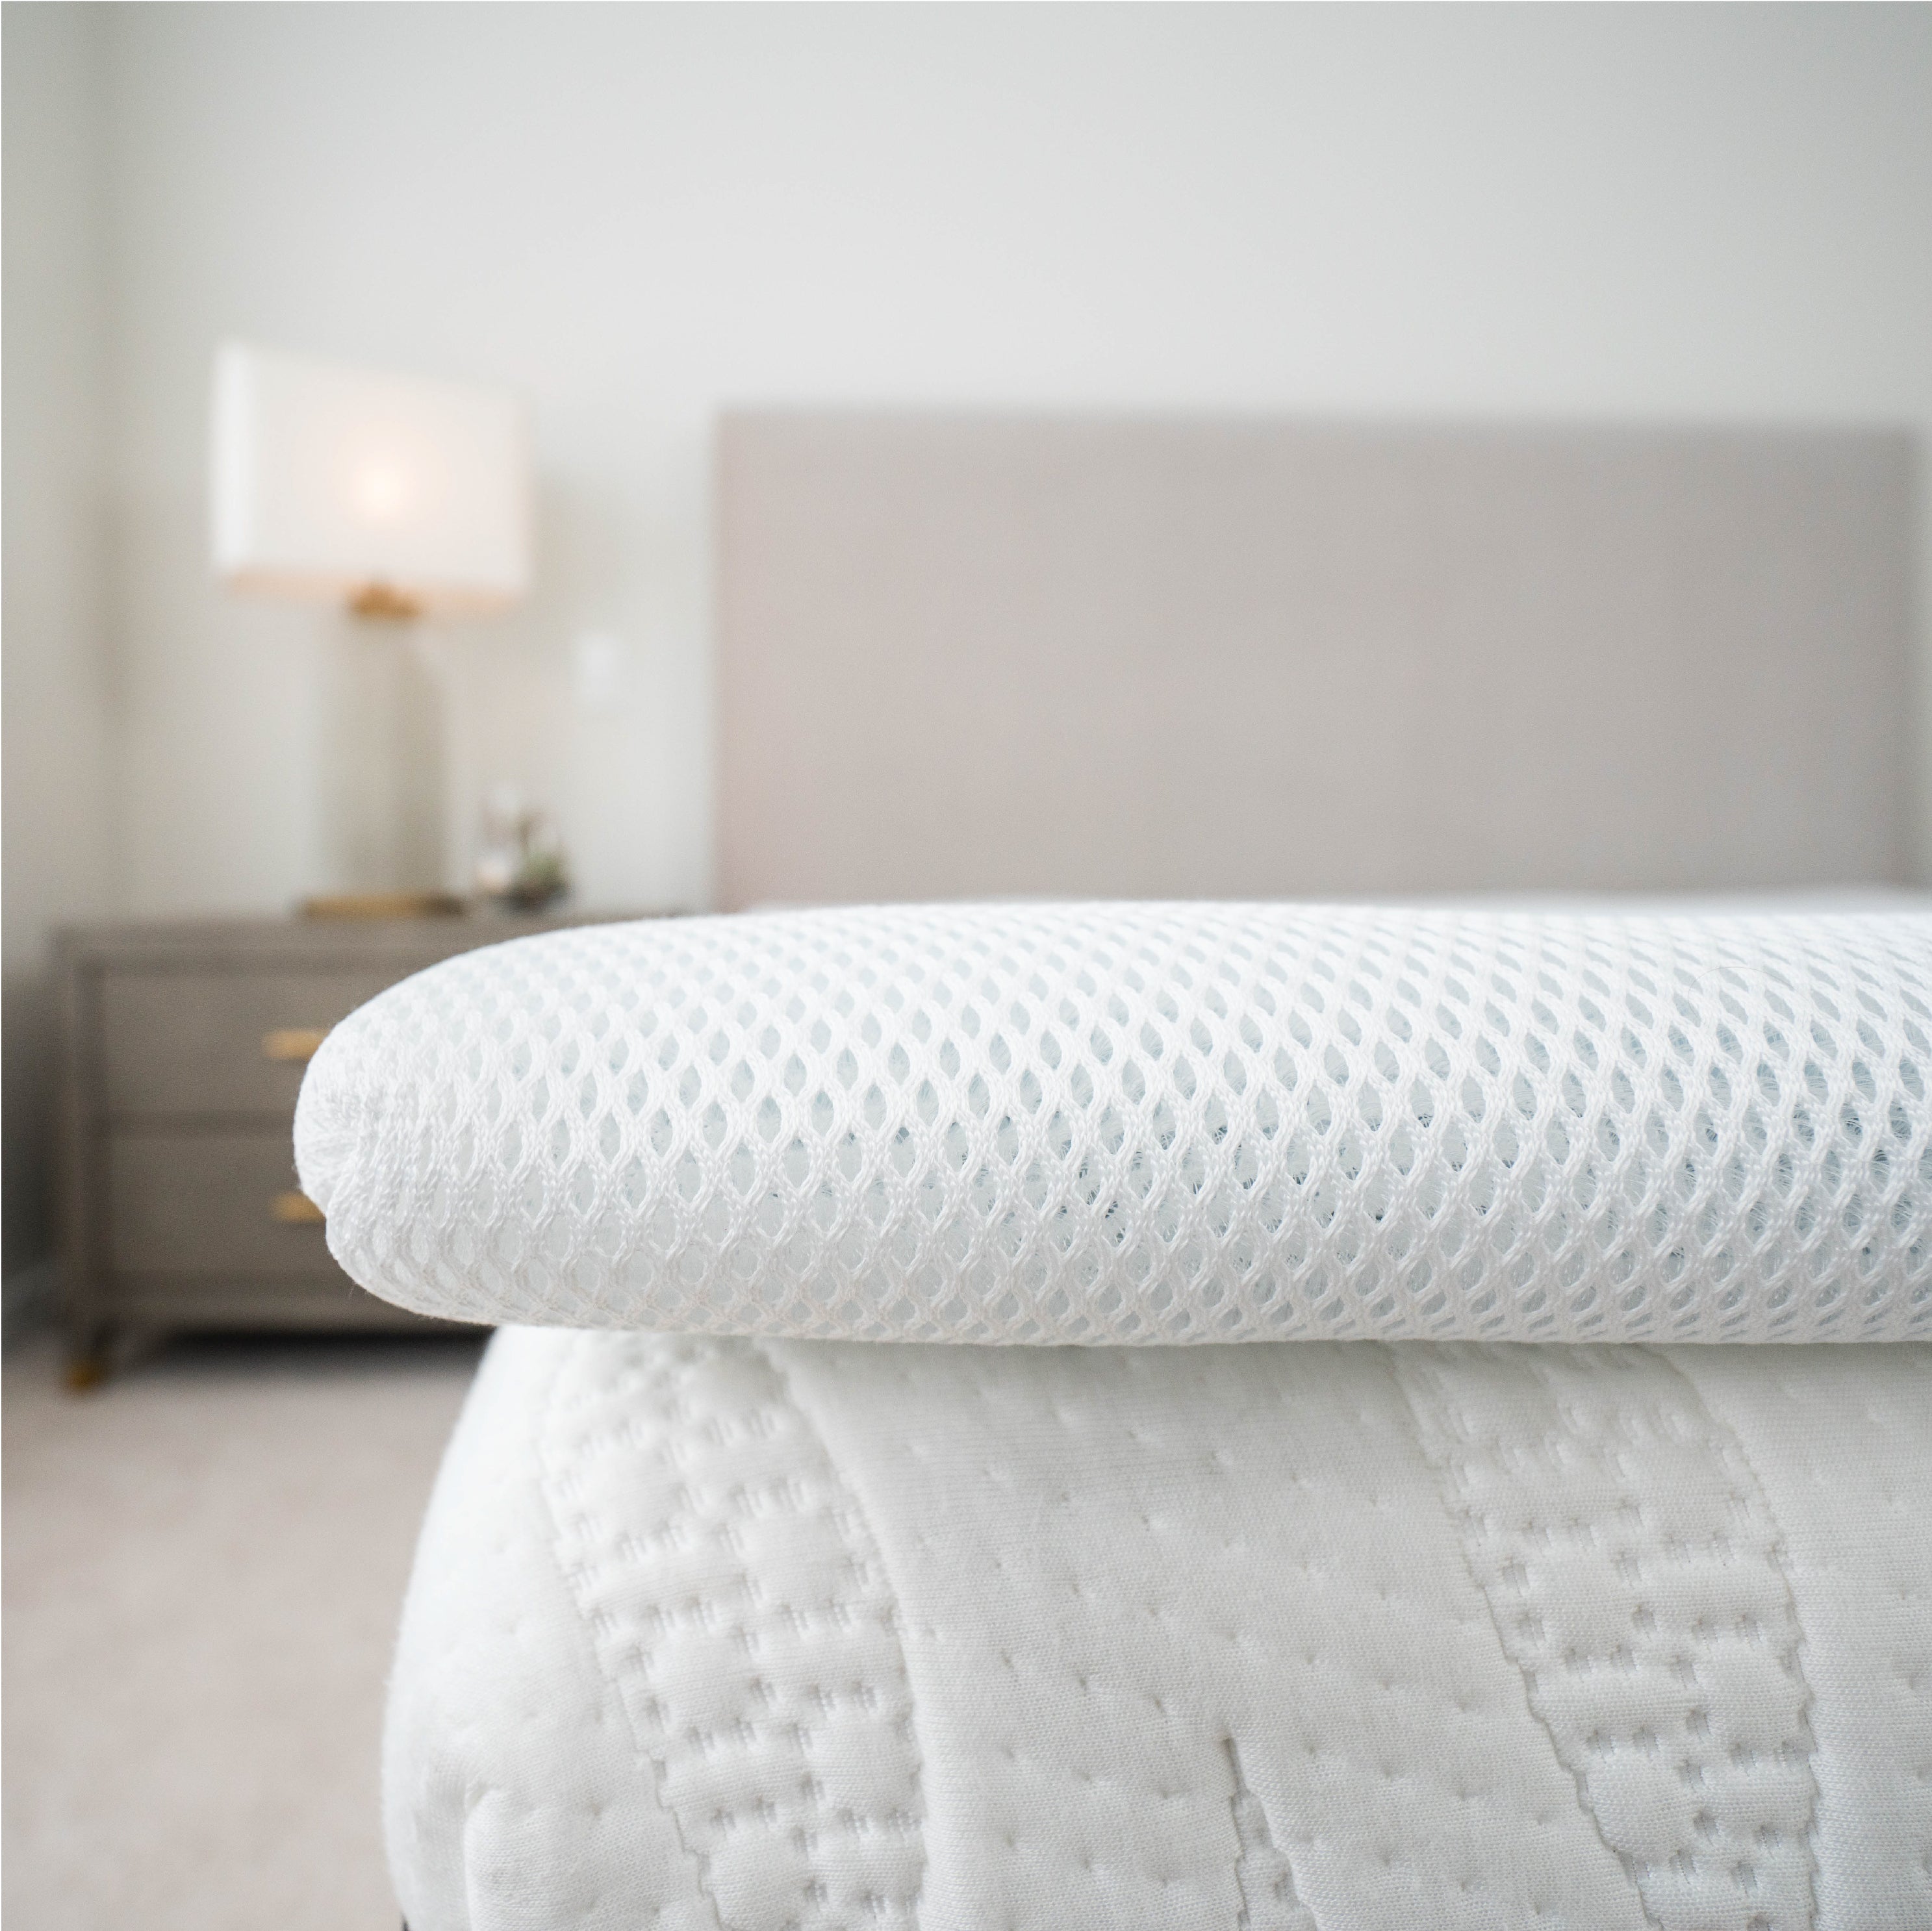 The Smart Topper: Heating and Cooling Mattress Pad